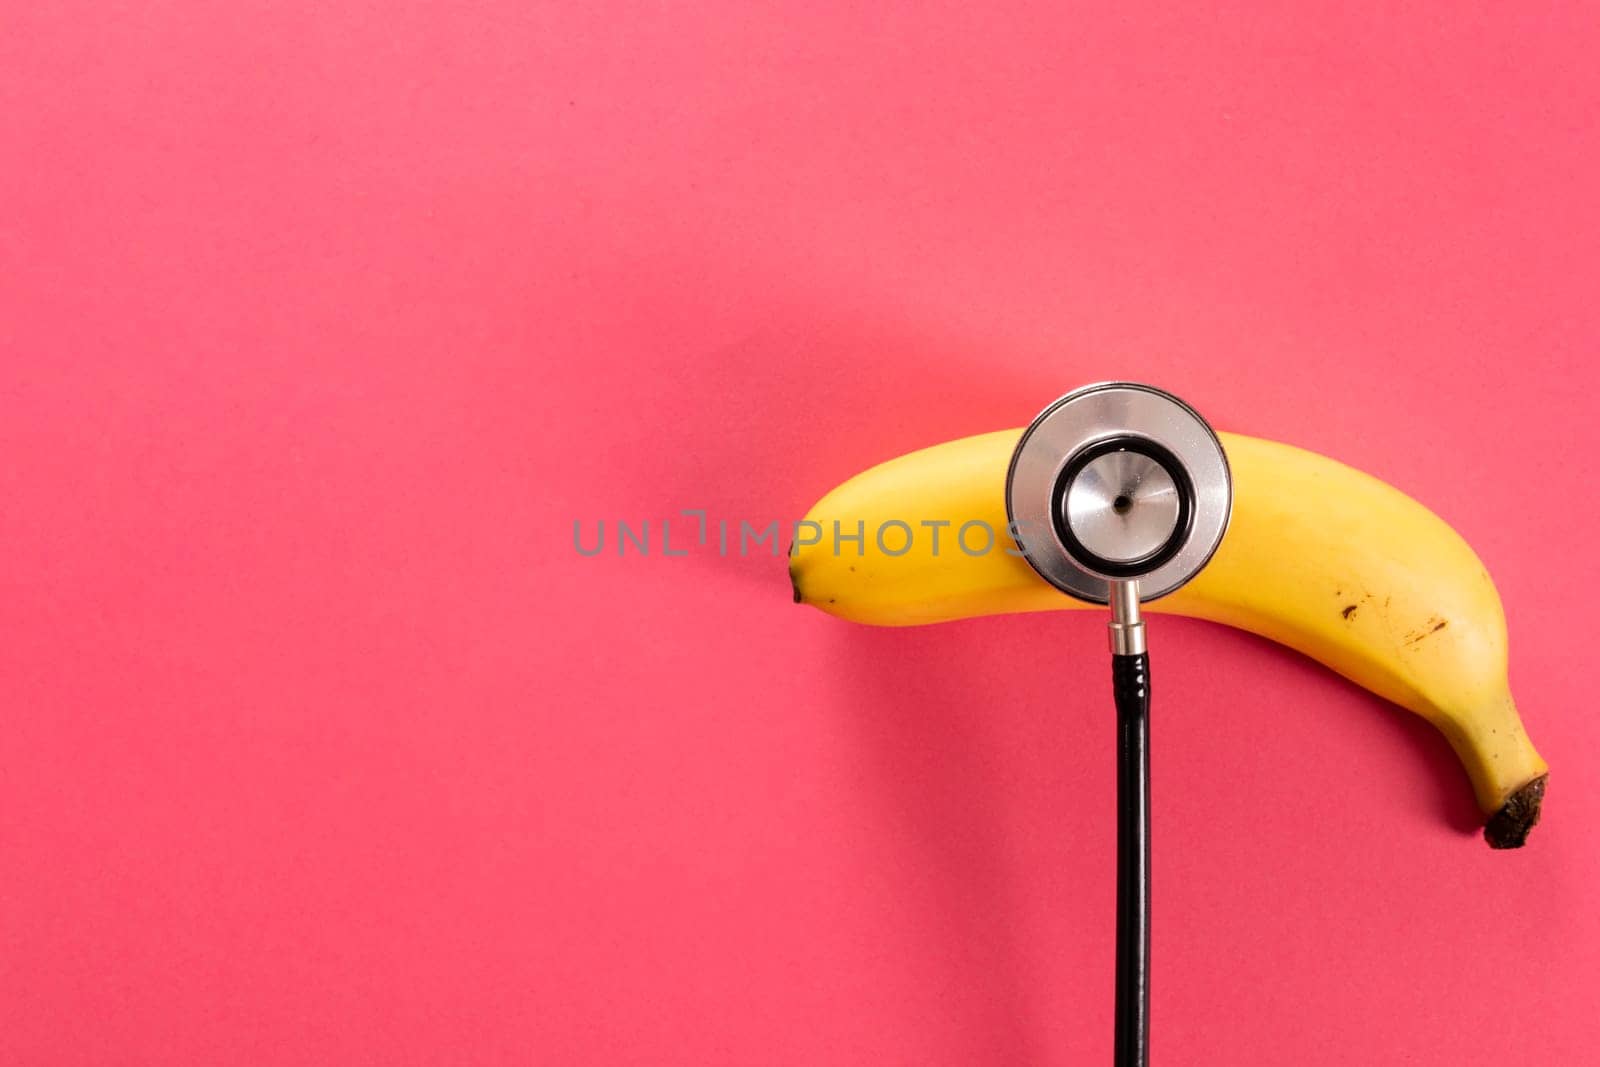 Overhead view of fresh banana with stethoscope by copy space over pink background. unaltered, organic food, healthy eating and medical equipment concept.